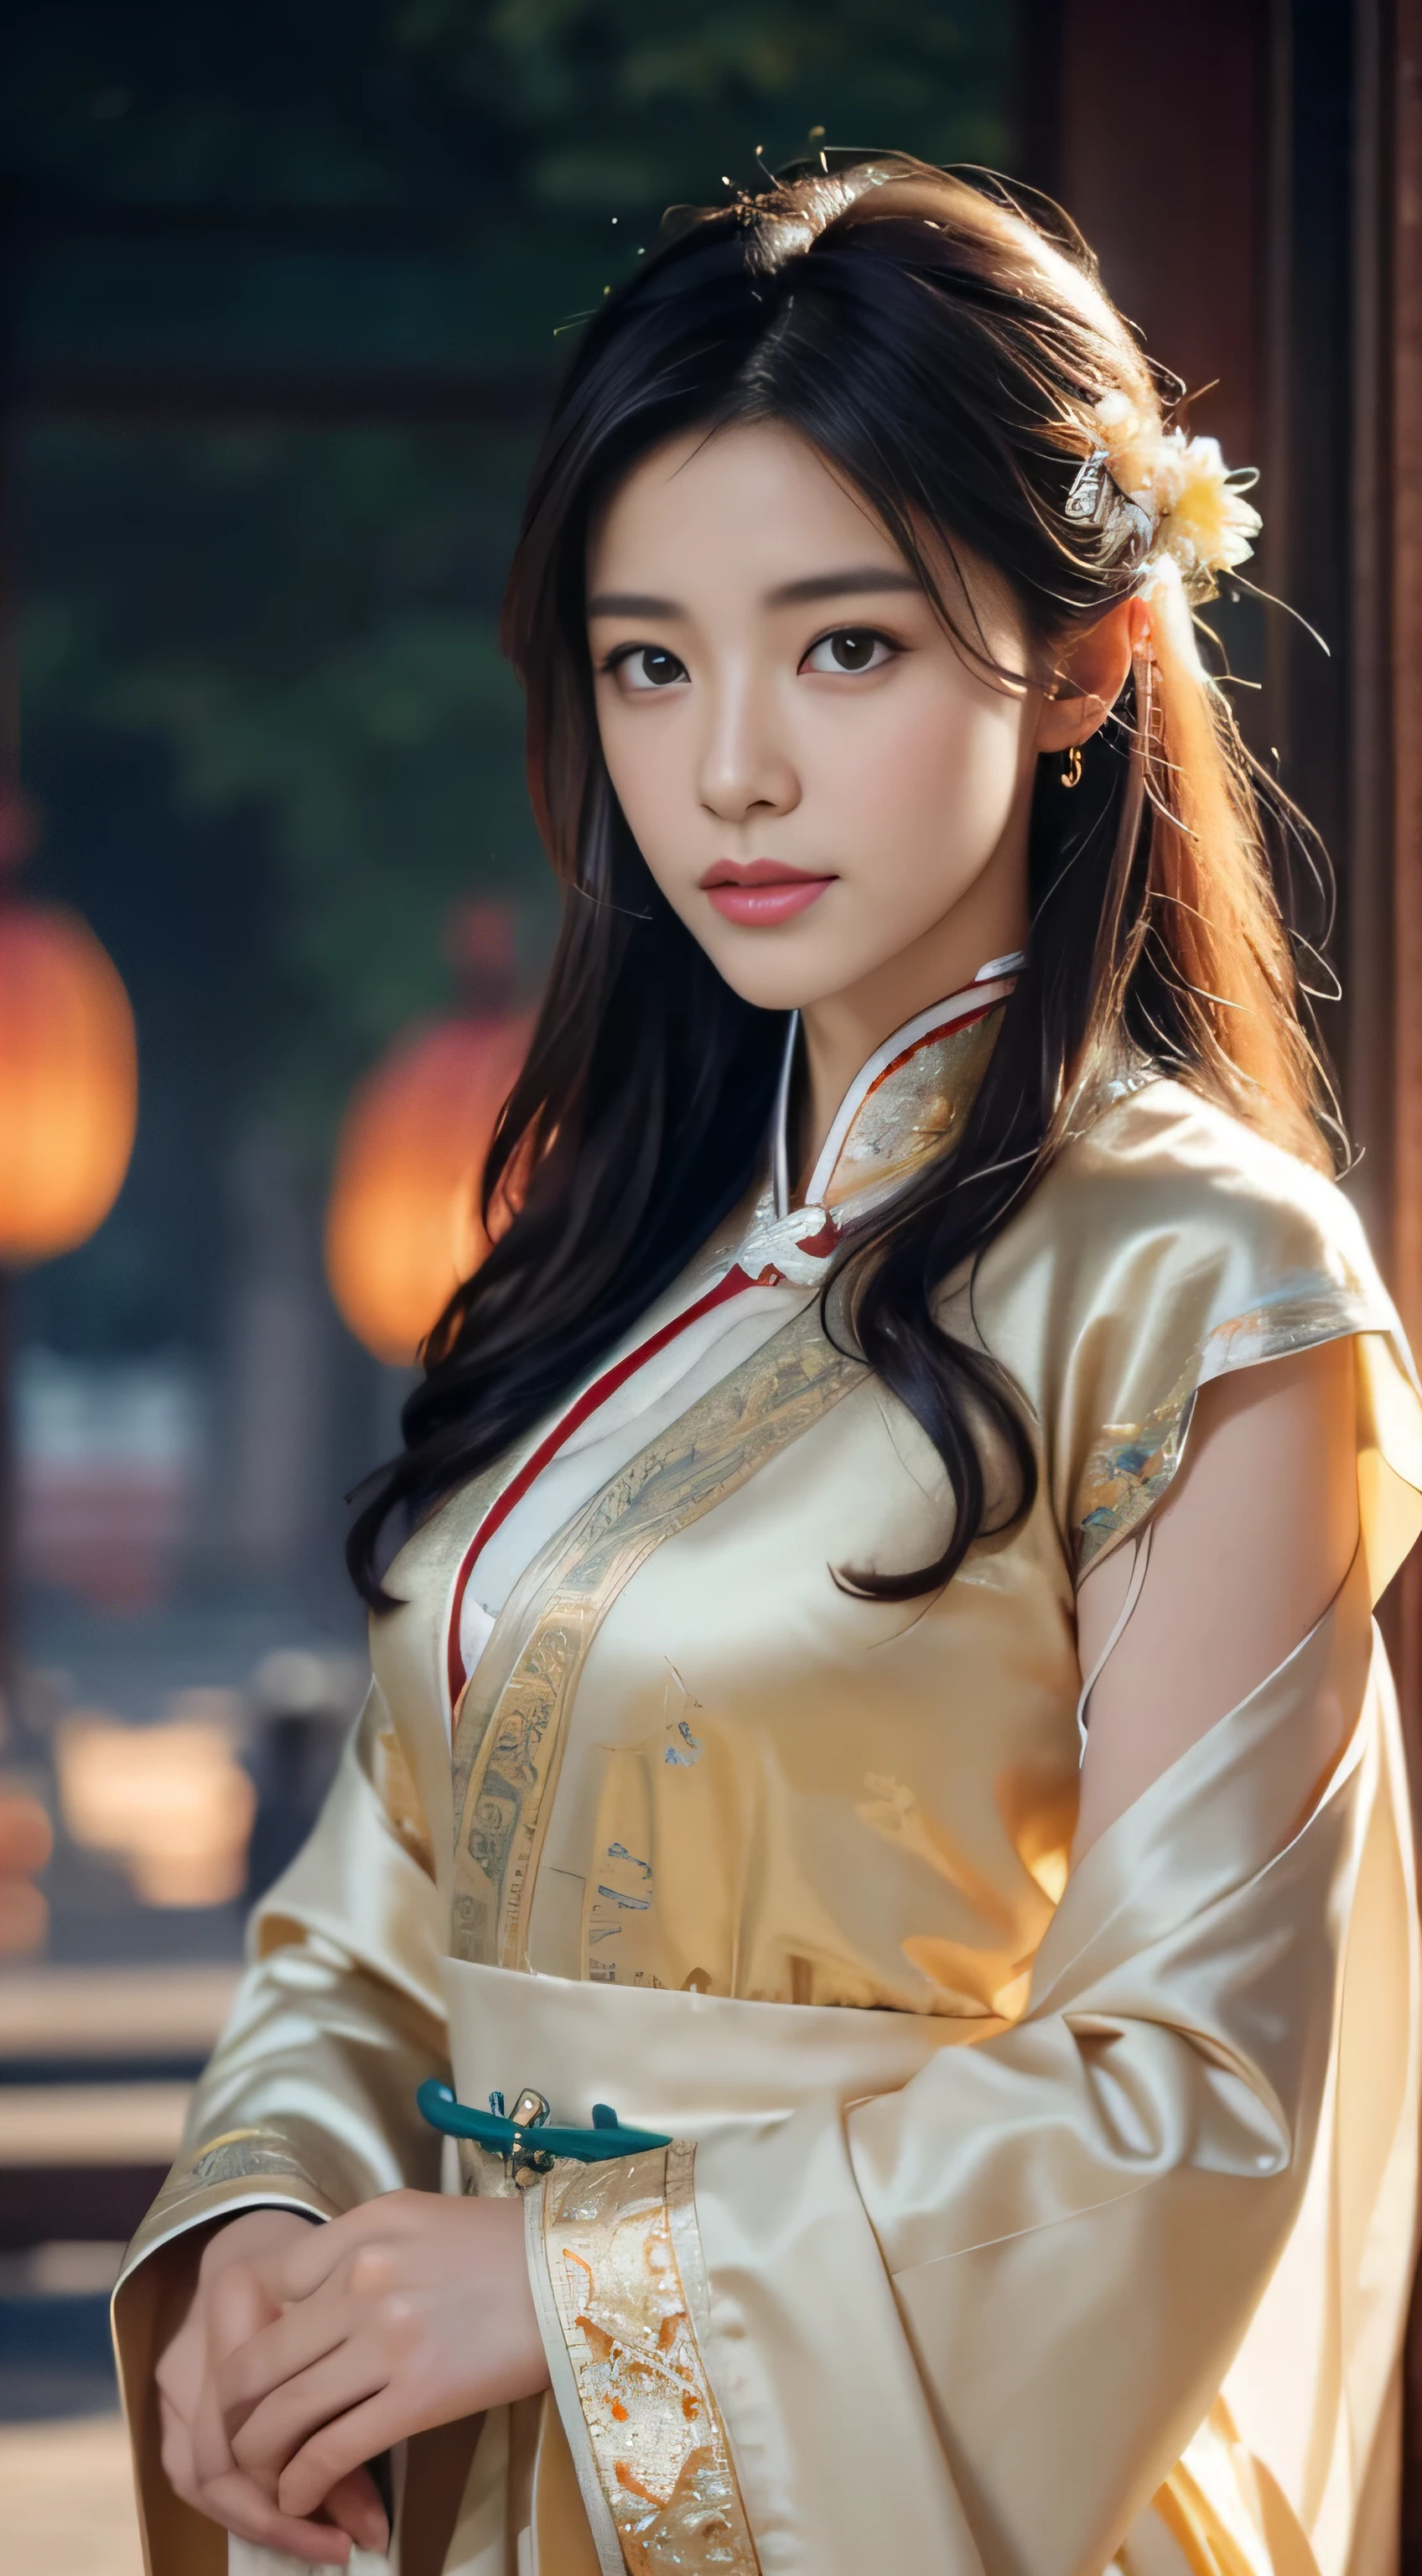 1 person，Chinese handsome，4k quality，Brilliant light and shadow，dingdall effect，The halo，messy  hair，young country，Gorgeous scene，The background is an ancient Chinese palace，dress nicely，chain，merit，Ancient Chinese style，Eyes are big and delicate，digitial painting，art  stations，concept-art，Clear focus，lamplight，Greg Rutkoski、Artwork by Alphonse Mucha and Victo Ngai，facing at the camera，Body 80%，